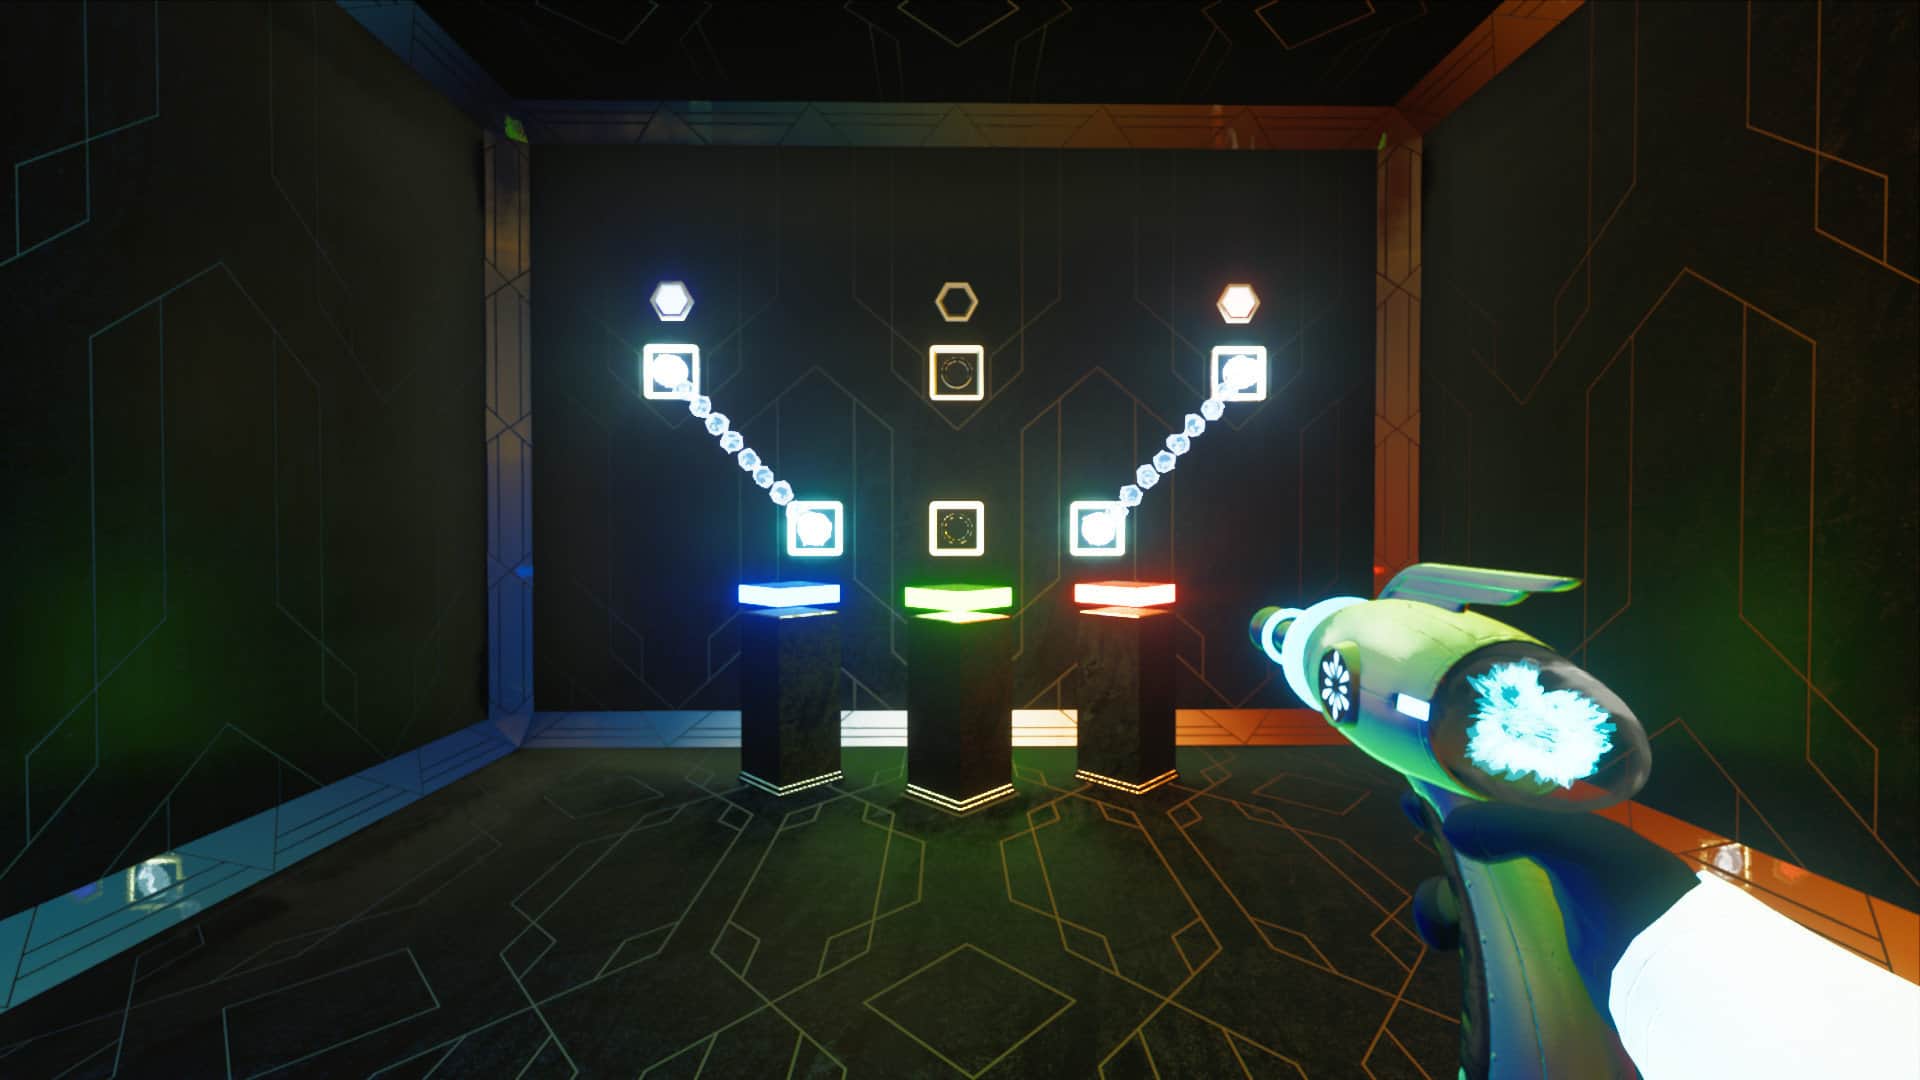 First person puzzler Faraday Protocol launches August 12